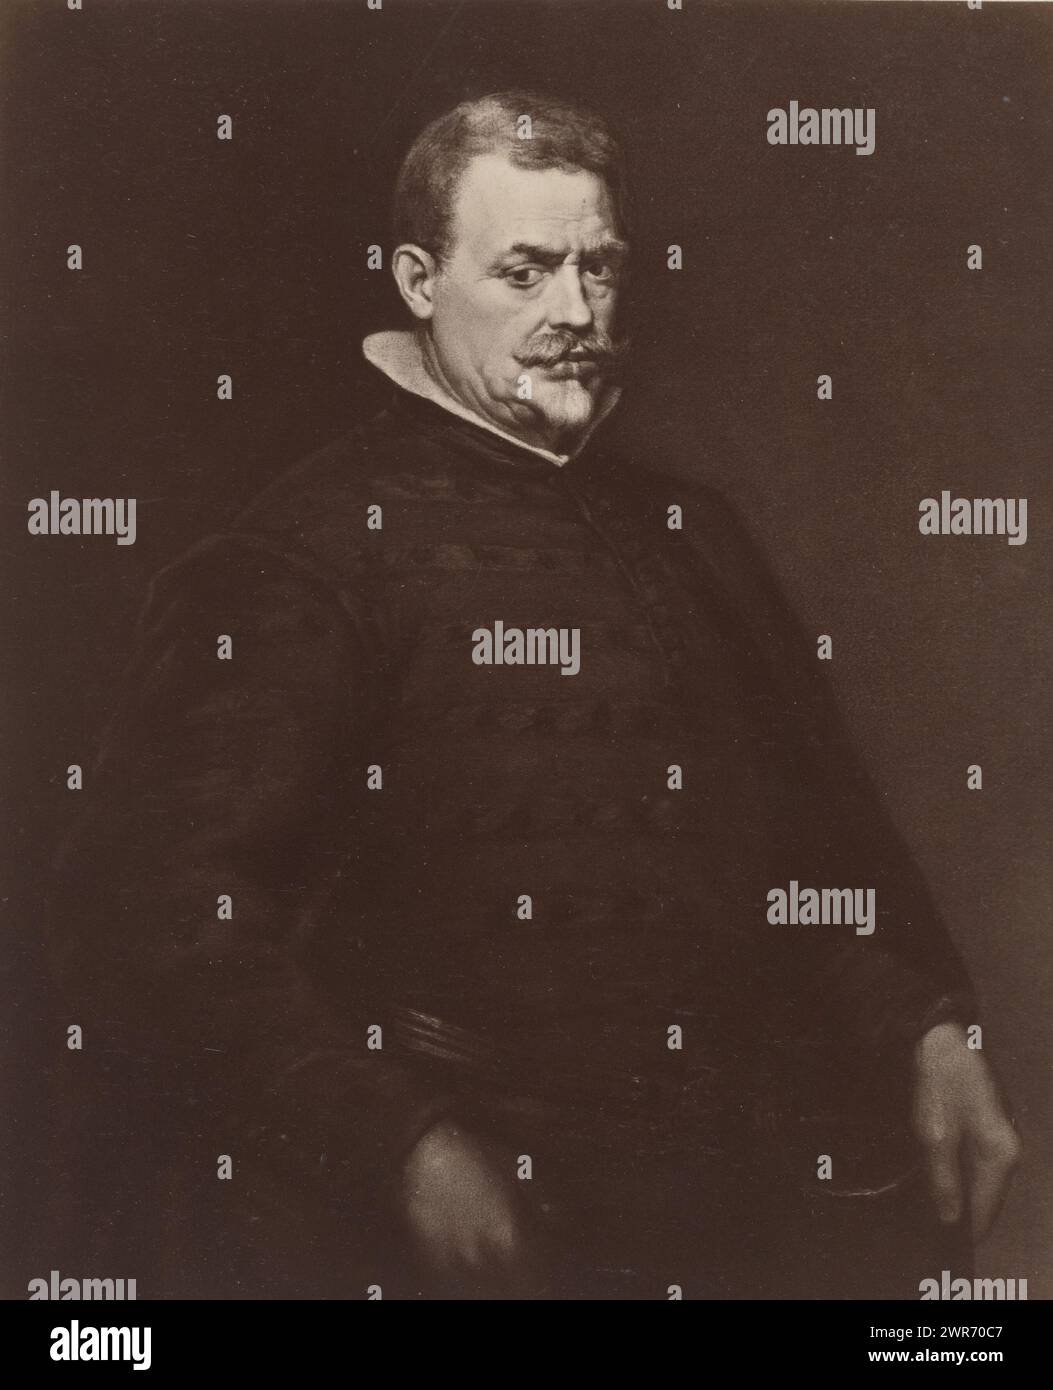 Photo reproduction of a painted portrait of Don Juan Mateos by Diego Velázquez, D. Velasquez: Männliches Bildniss (title on object), anonymous, after painting by: Diego Rodriguez de Silva y Velázquez, publisher: Photographische Gesellschaft Berlin, Berlin, c. 1870 - in or before 1875, paper, albumen print, height 211 mm × width 175 mm, photograph Stock Photo